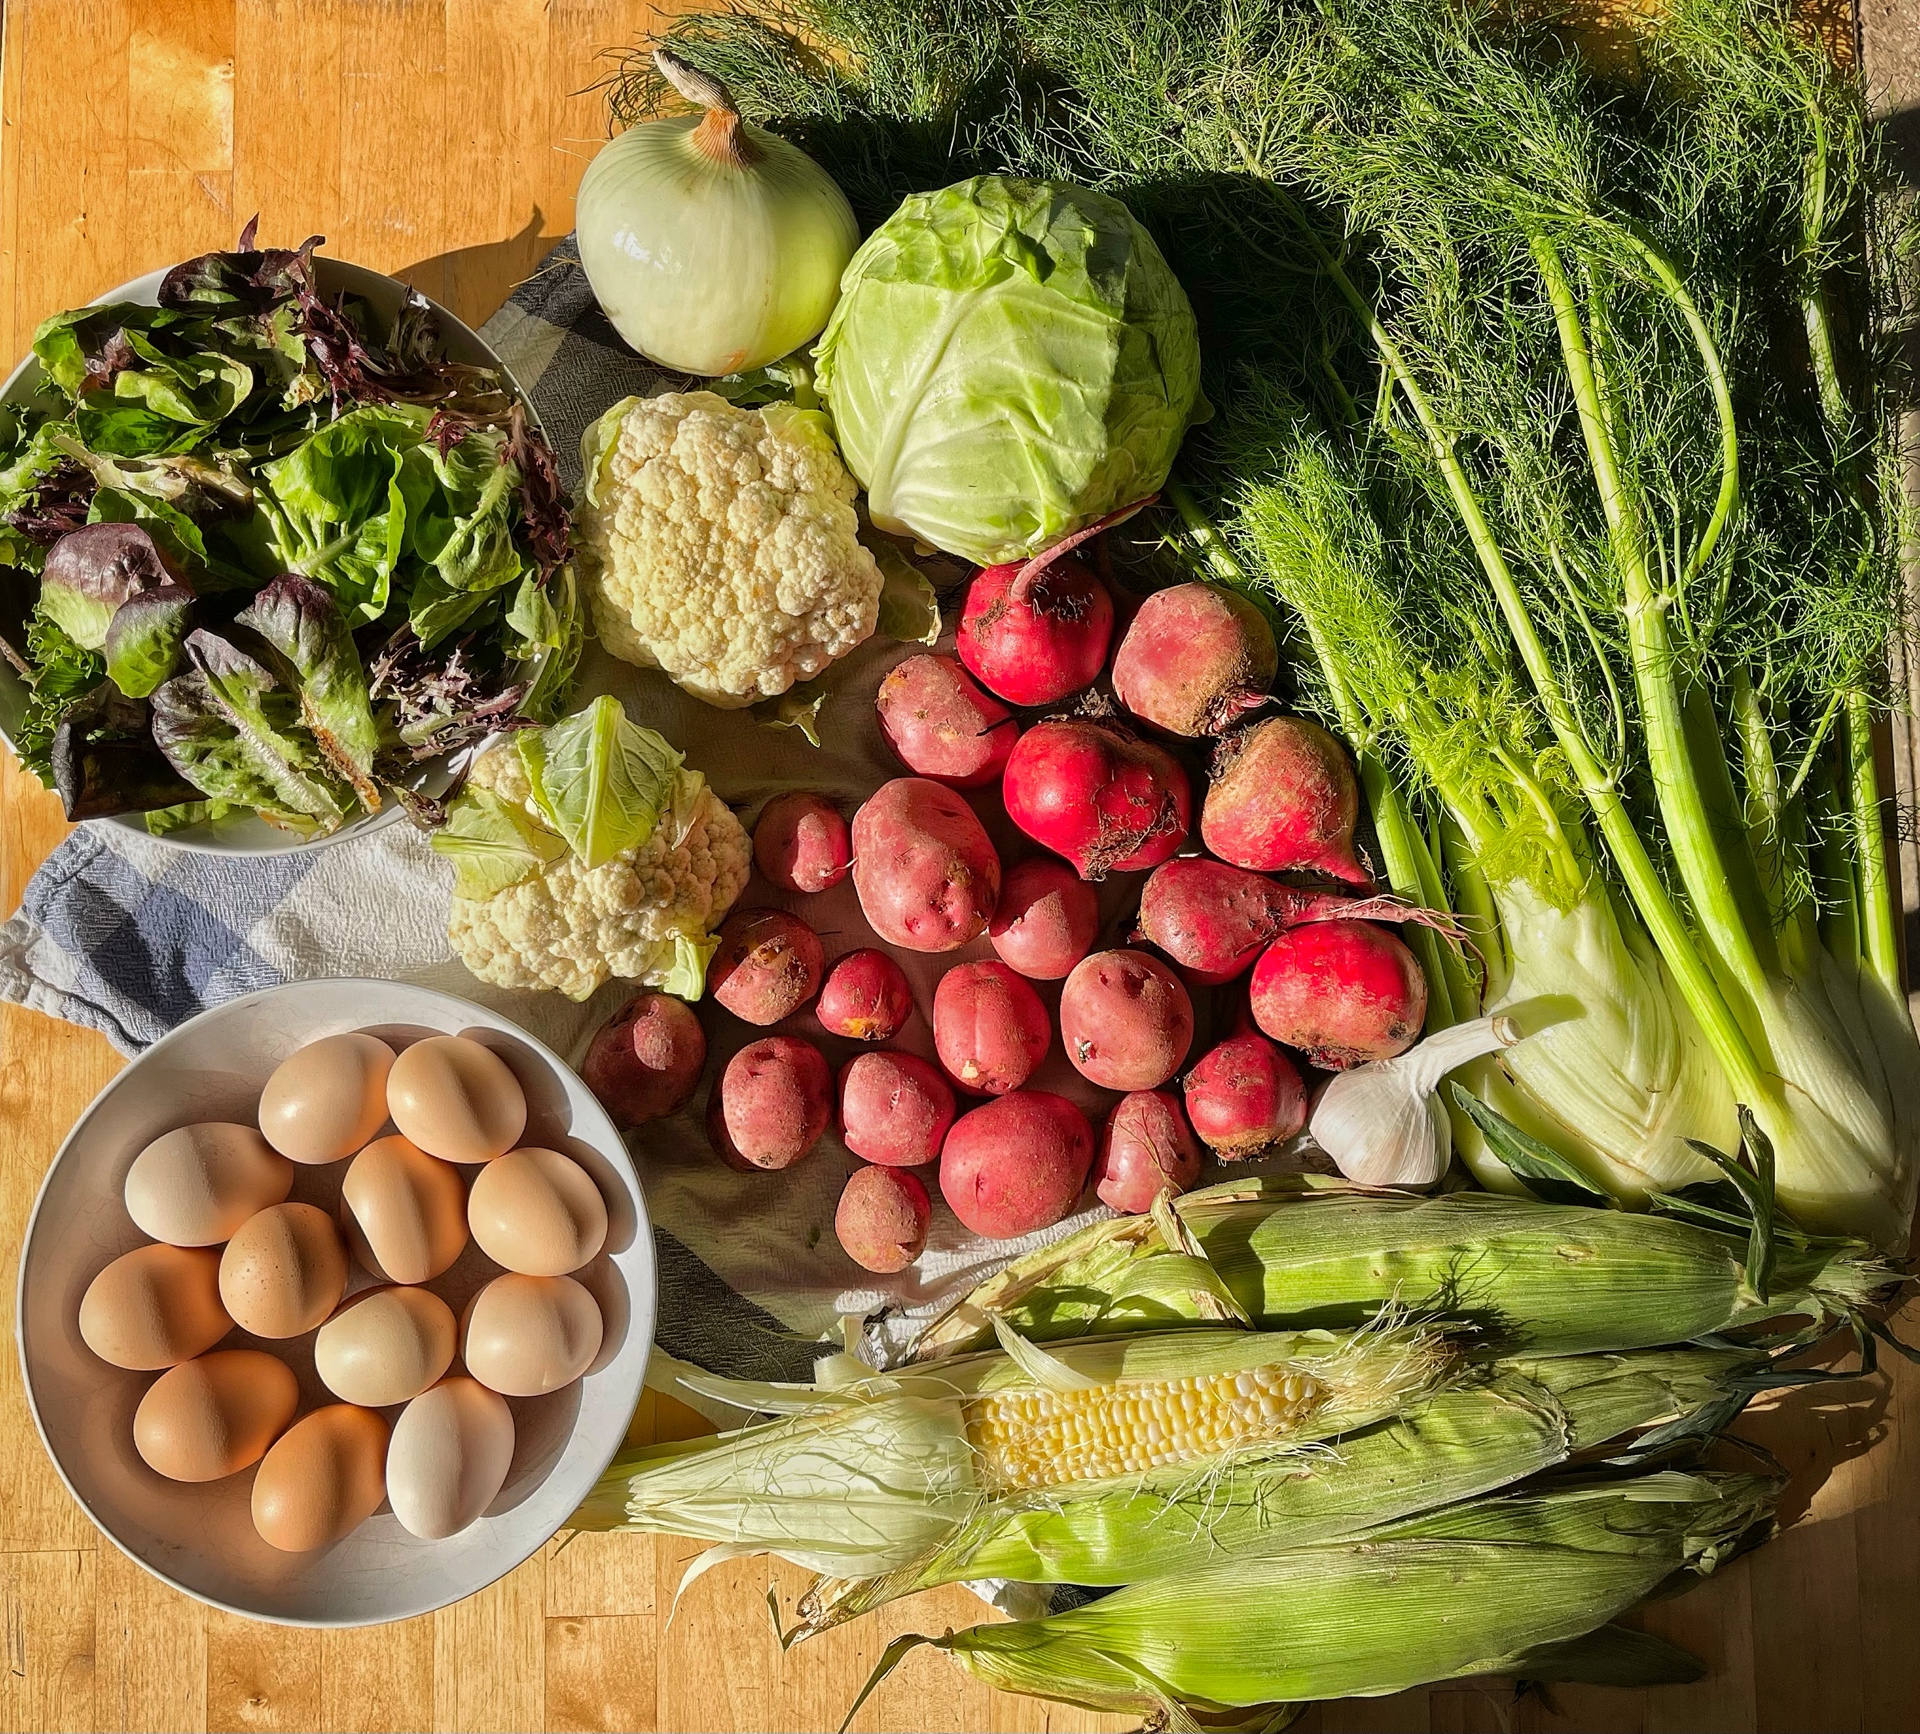 A selection of freshly grown Rootbound vegetables (including red potatoes, cabbage, and fennel) and eggs.